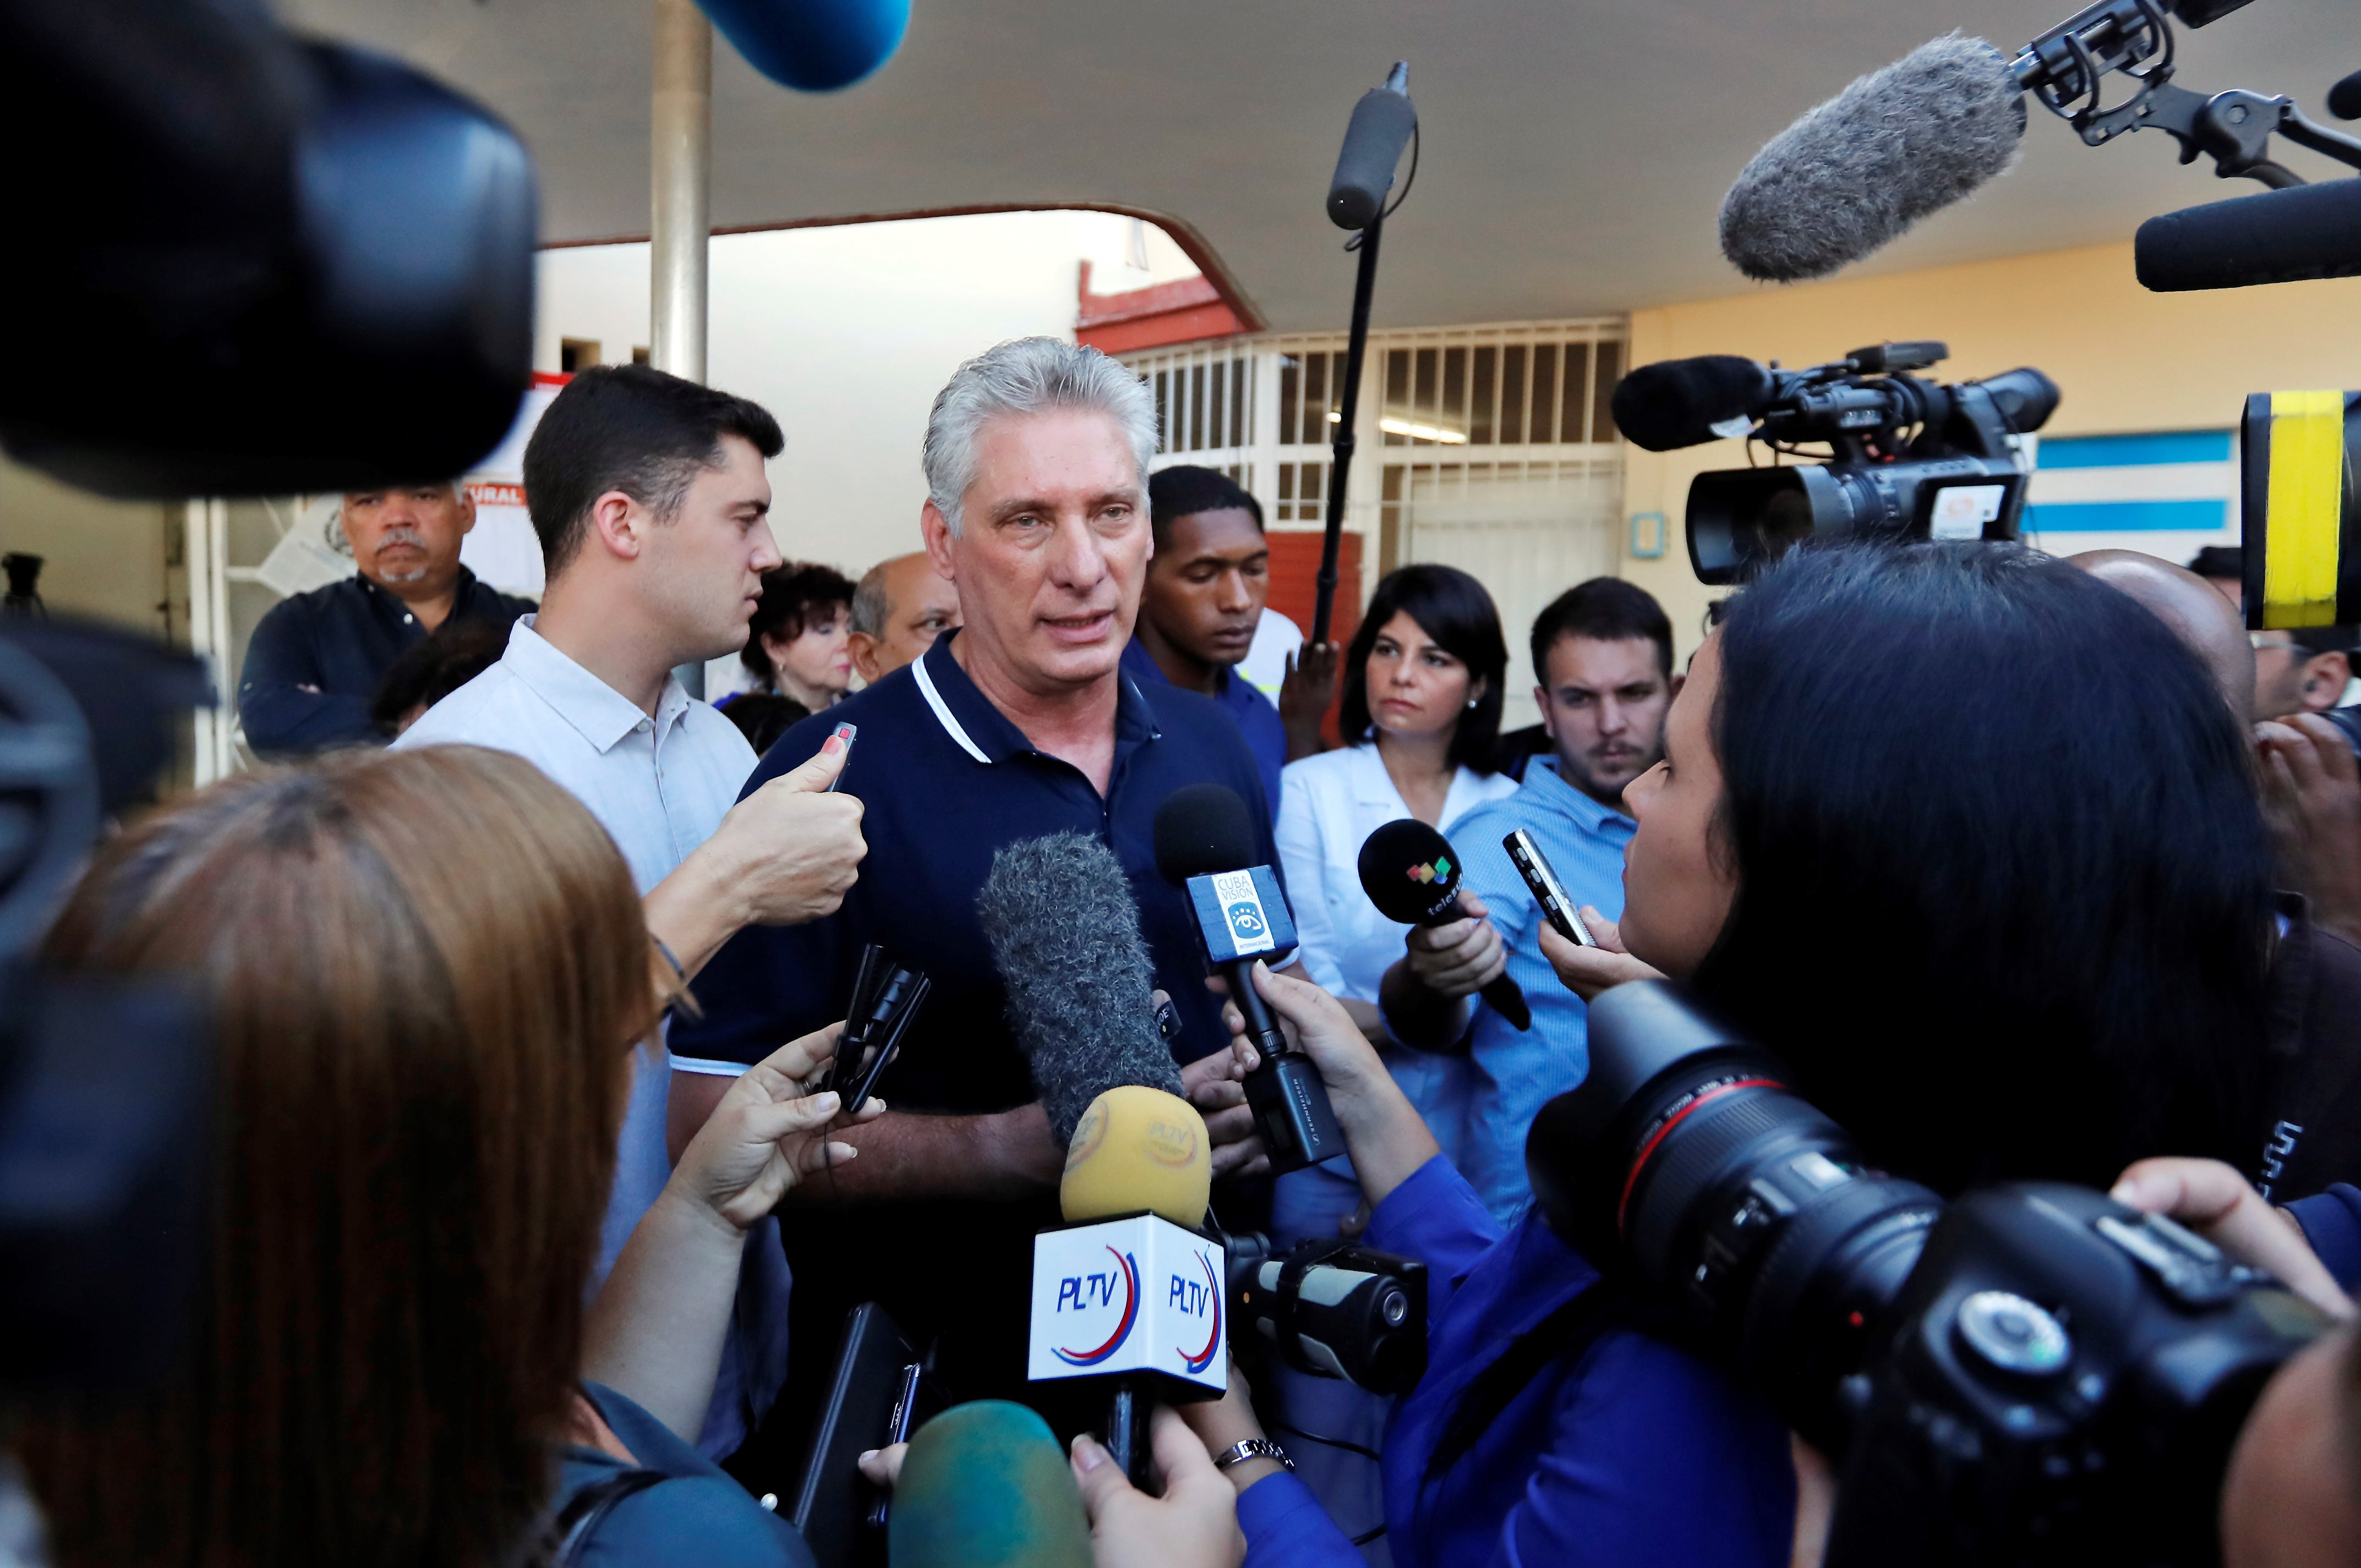 epa07393029 Cuban President Miguel Diaz-Canel delivers statements upon his arrival to an electoral college to vote in the referendum on the new Constitution, in Havana, Cuba, 24 February 2019. More than 25,000 polling stations opened their doors this Sunday in Cuba to vote in the referendum on the new Constitution - which ratifies communism and as a novelty recognizes private property - and to which more than eight million citizens are summoned.  EPA/ERNESTO MASTRASCUSA